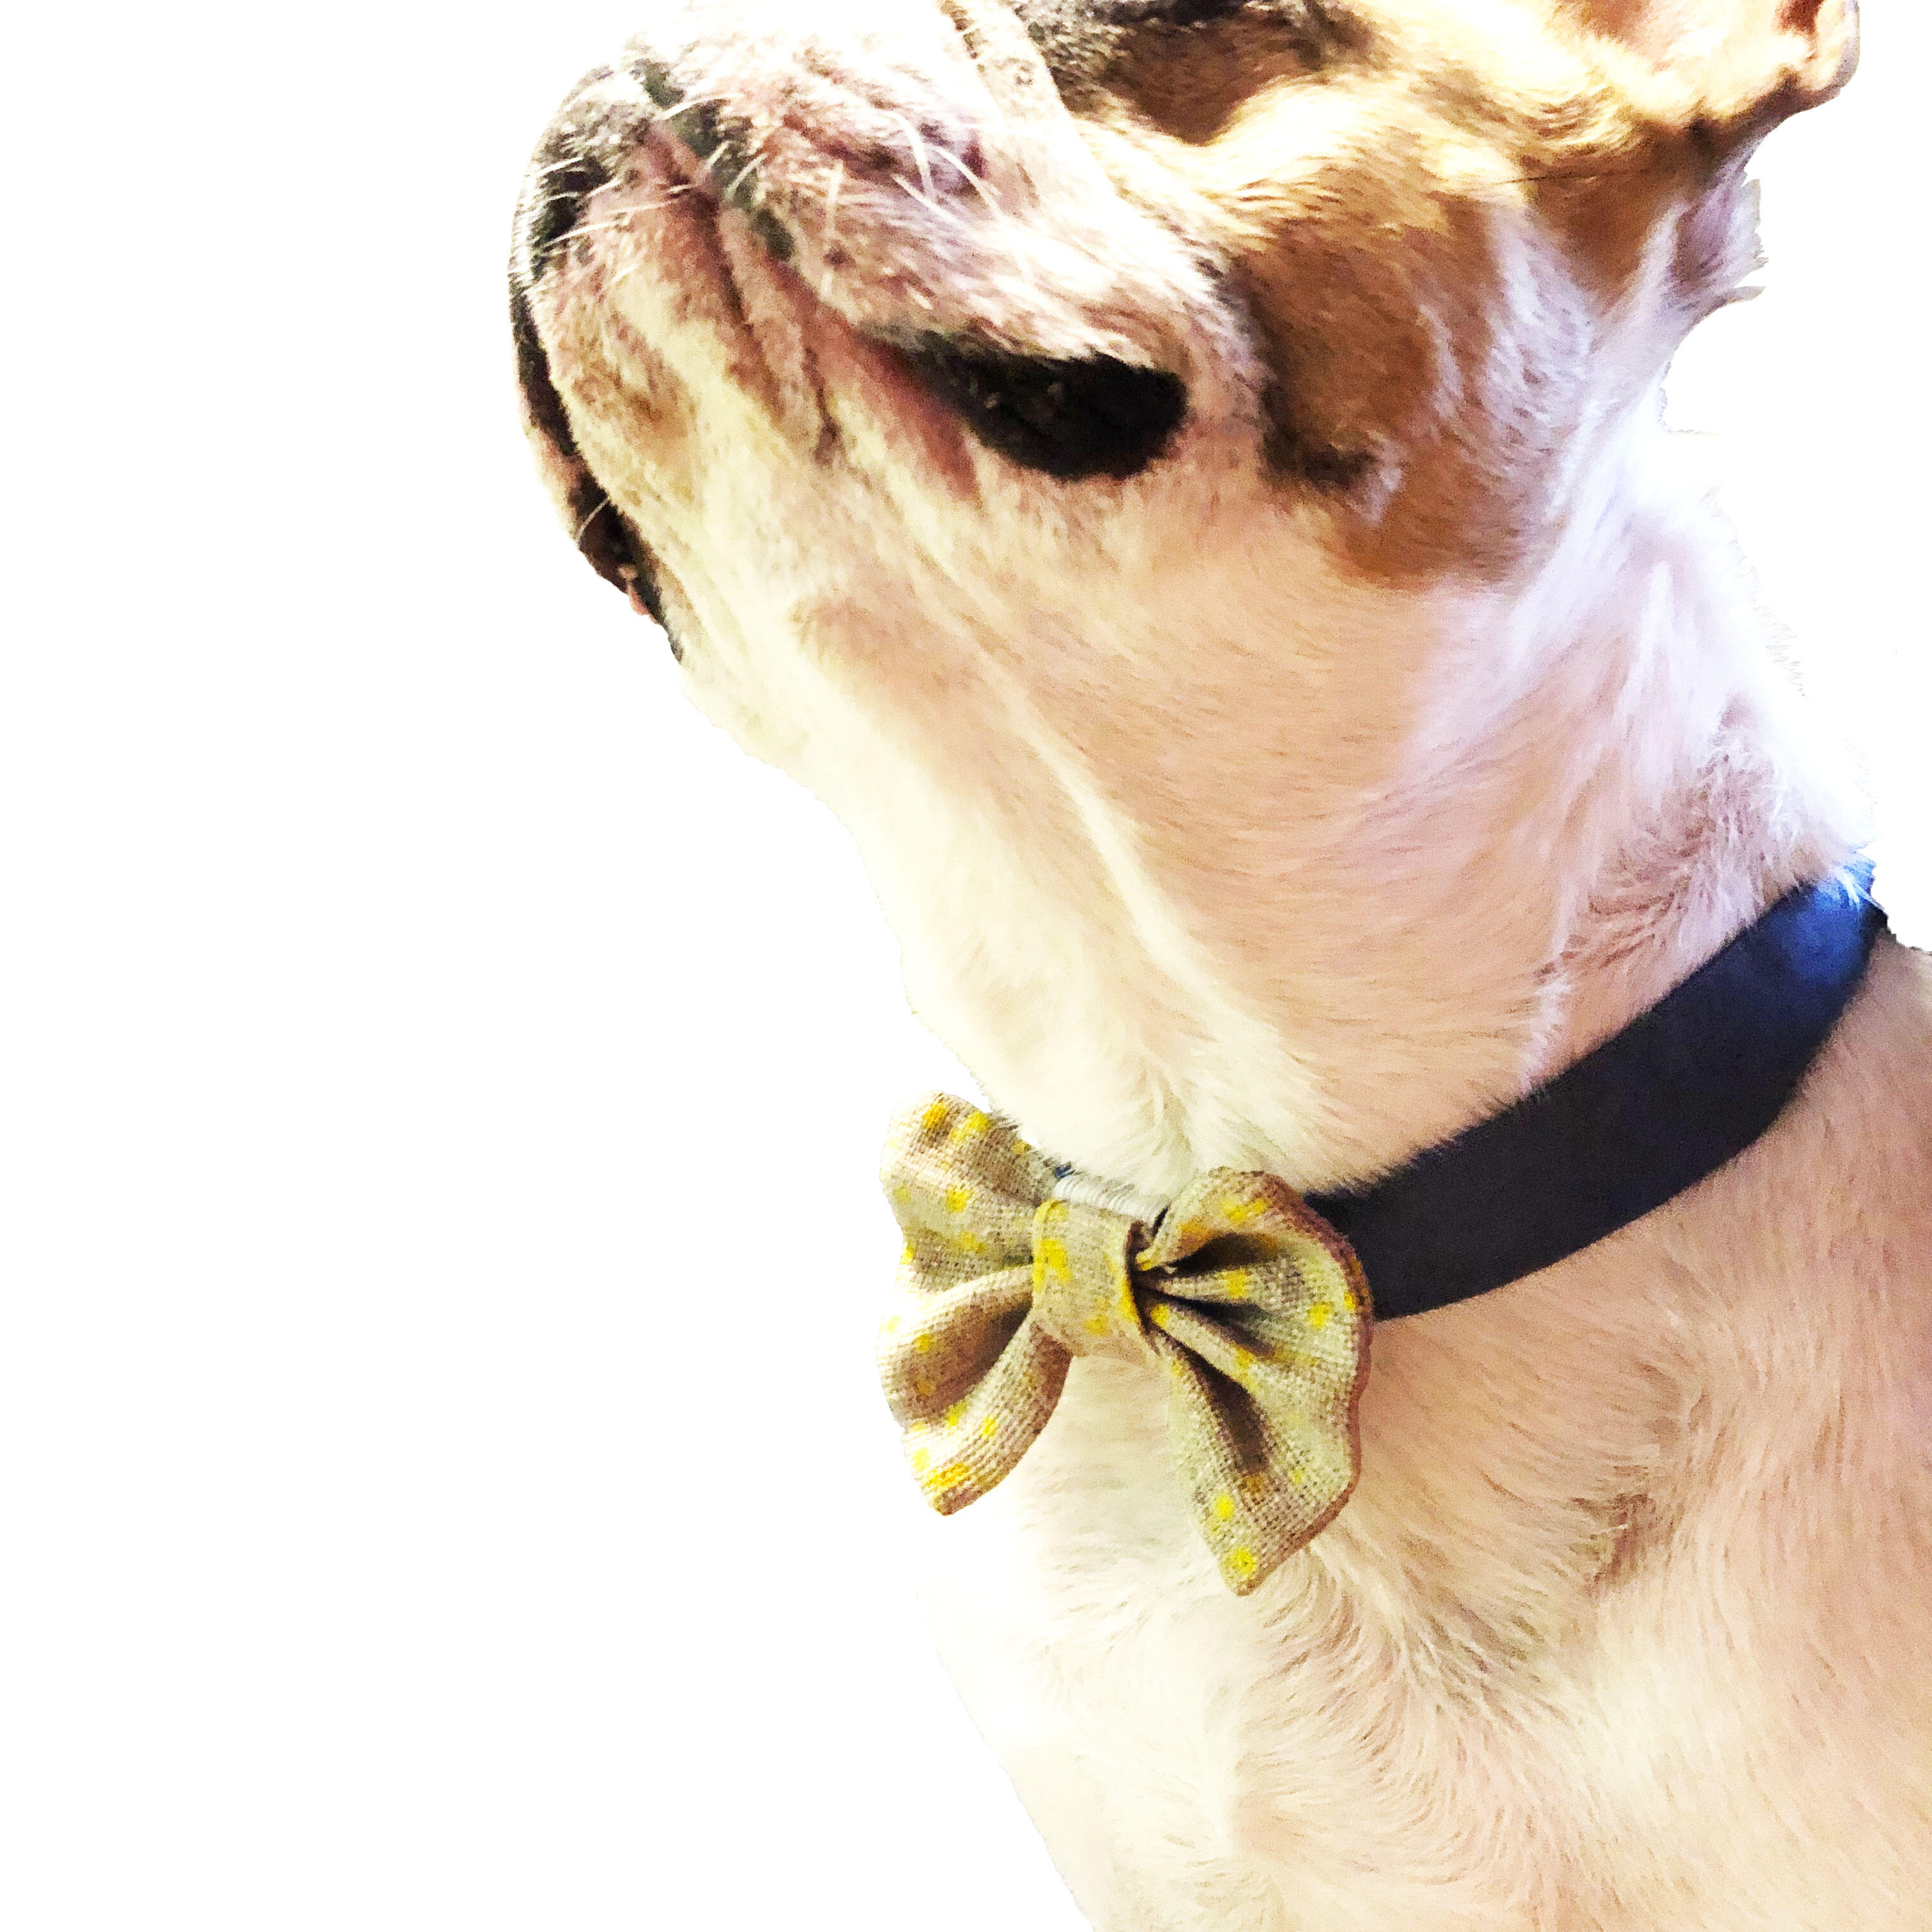 Decorative bow tie for the dog 